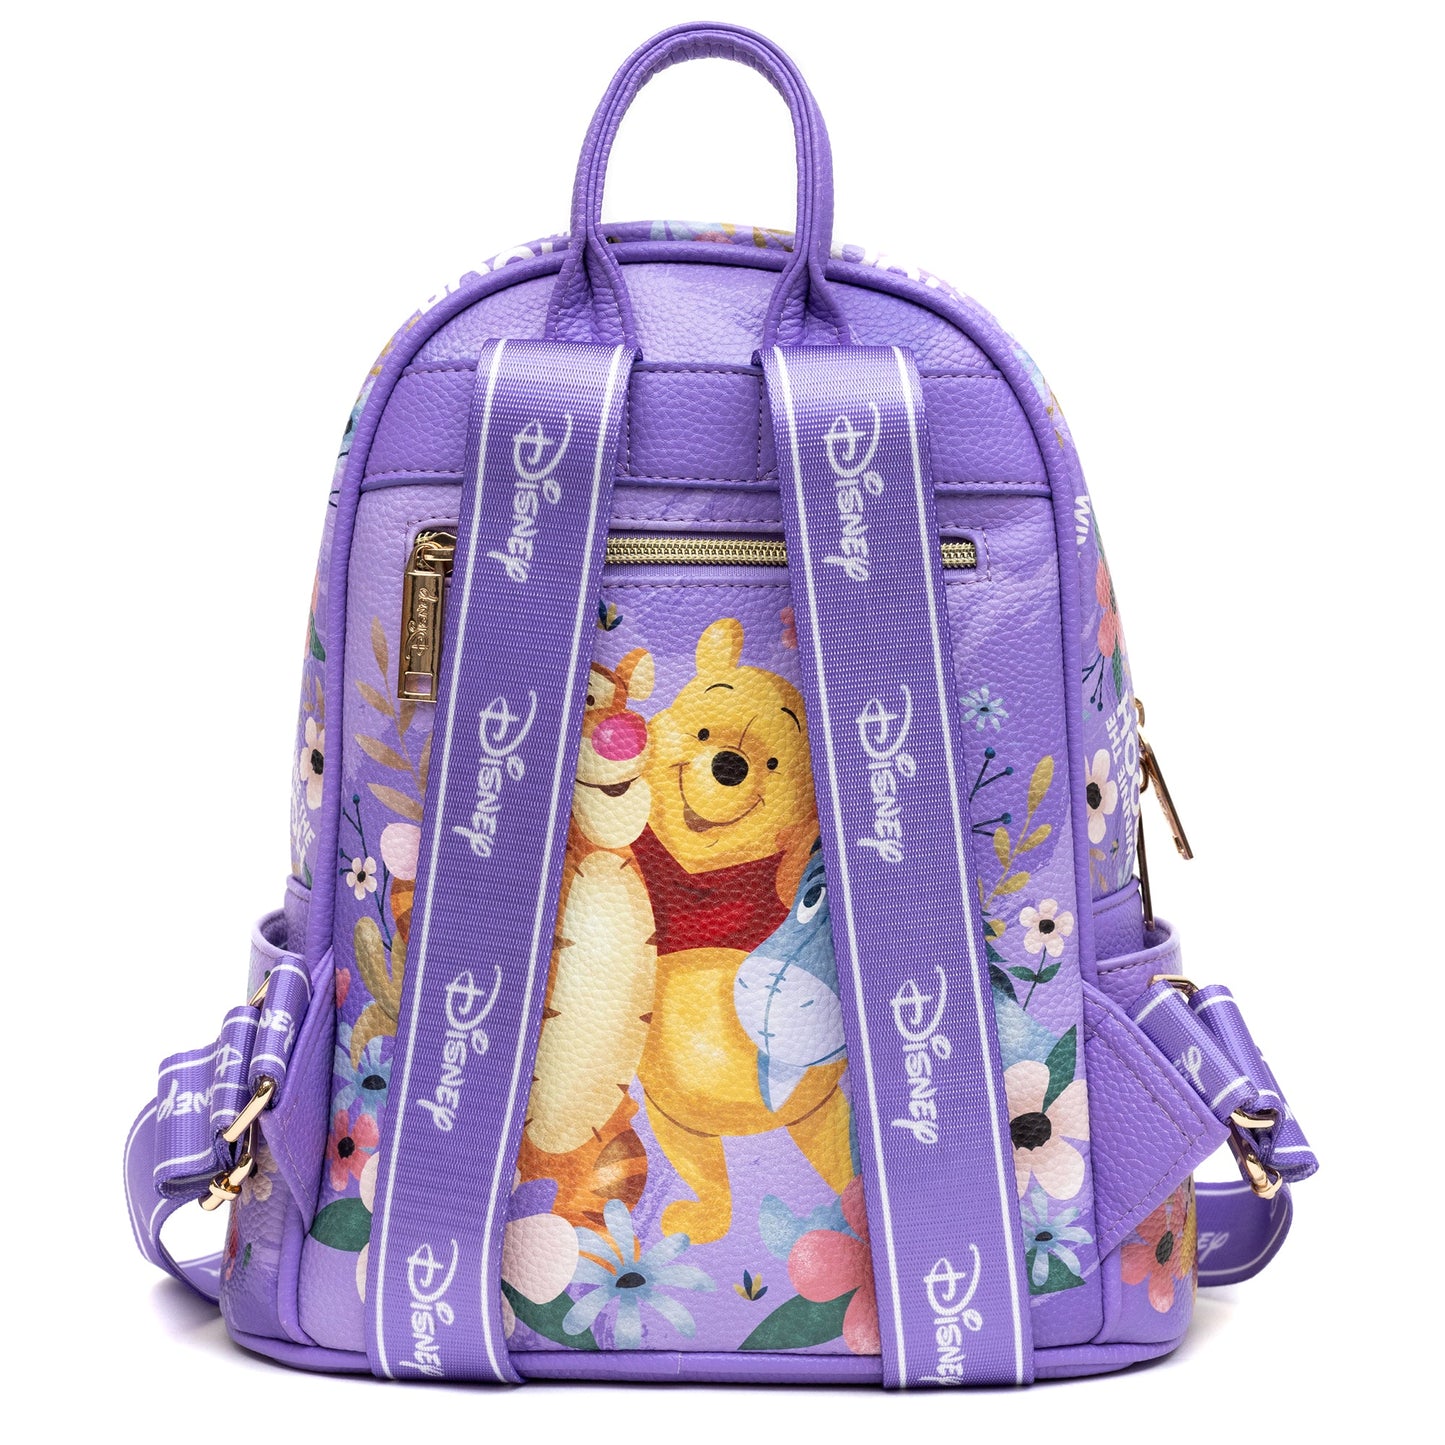 Exclusive Limited Edition-Pueplw Winnie the Pooh Vegan Leather Backpack